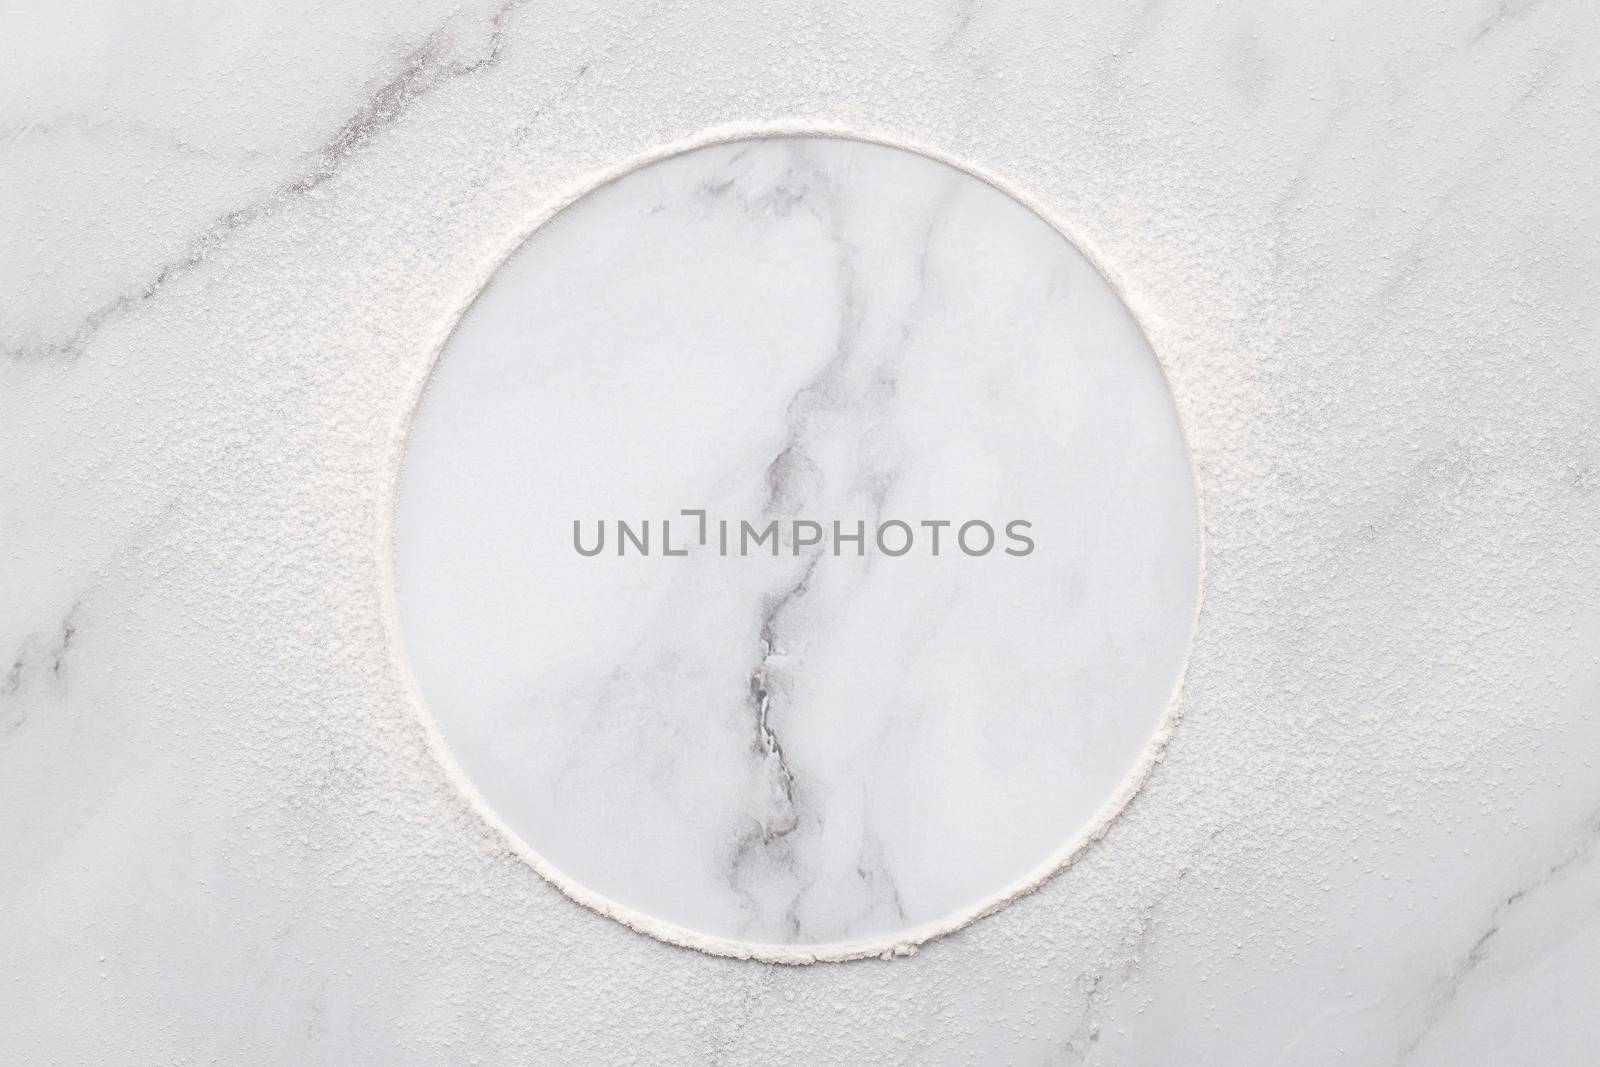 Scattered wheat flour on white marble background. Sprinkled wheat flour circle on white background. by kerdkanno